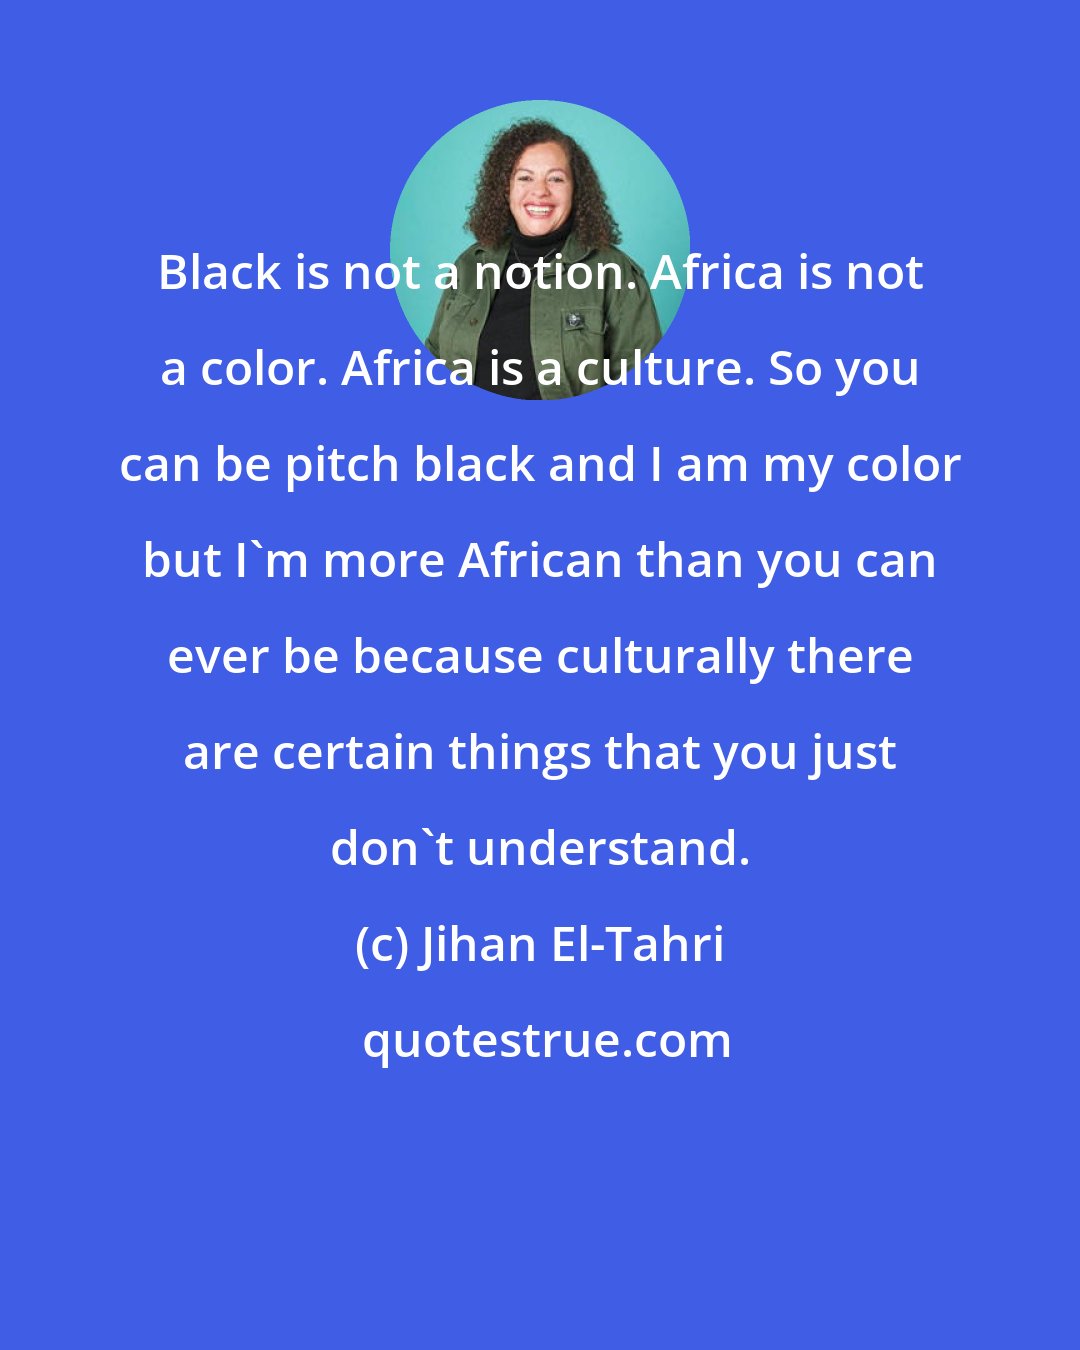 Jihan El-Tahri: Black is not a notion. Africa is not a color. Africa is a culture. So you can be pitch black and I am my color but I'm more African than you can ever be because culturally there are certain things that you just don't understand.